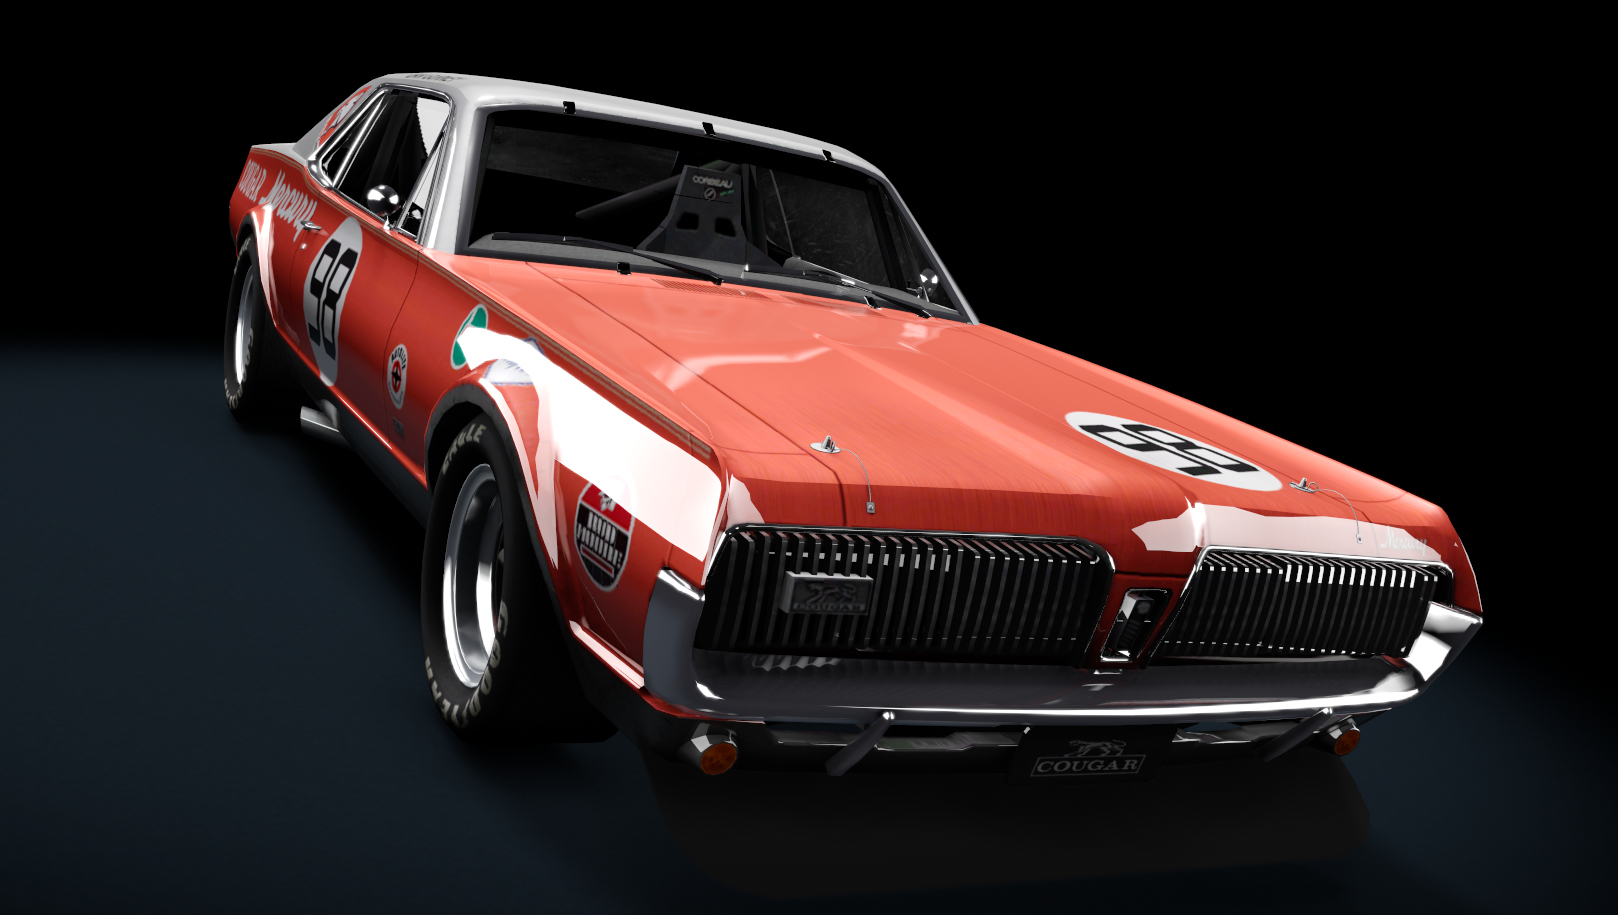 ACL TA '67 Mercury Cougar Preview Image